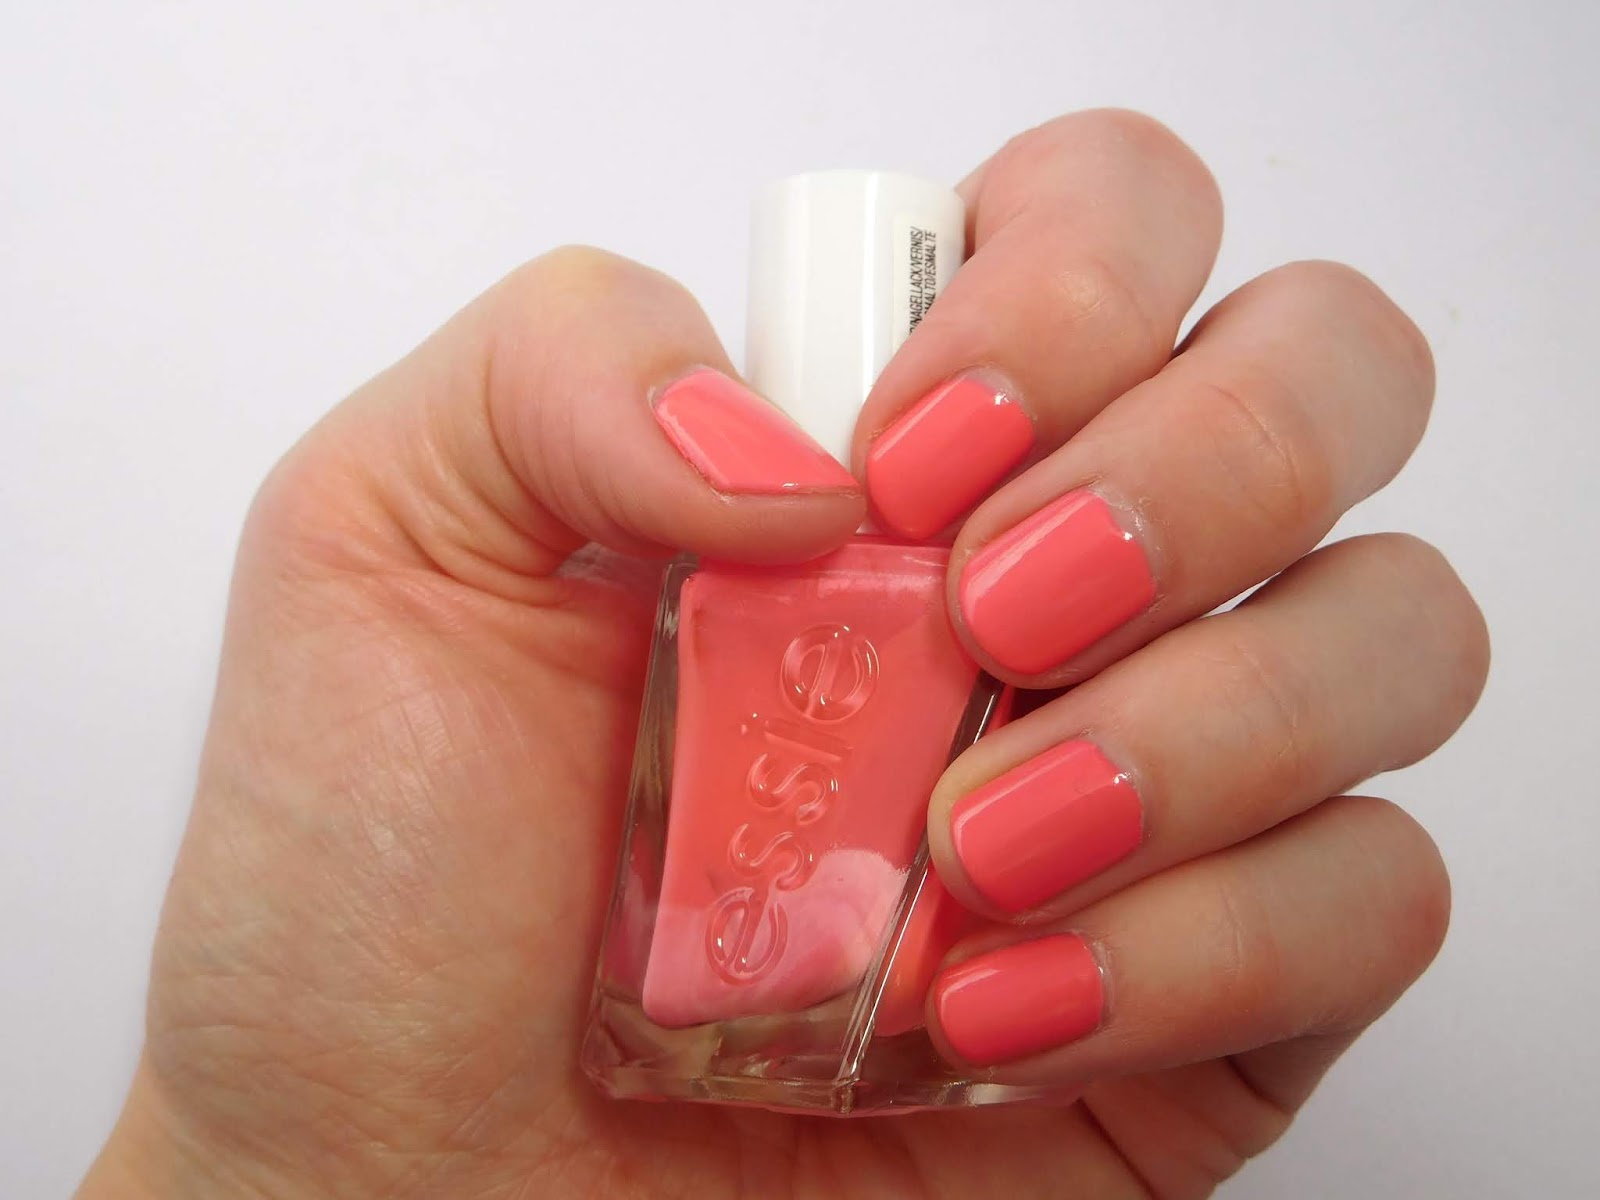 9. Essie Gel Couture in "Spice It Up" - wide 6